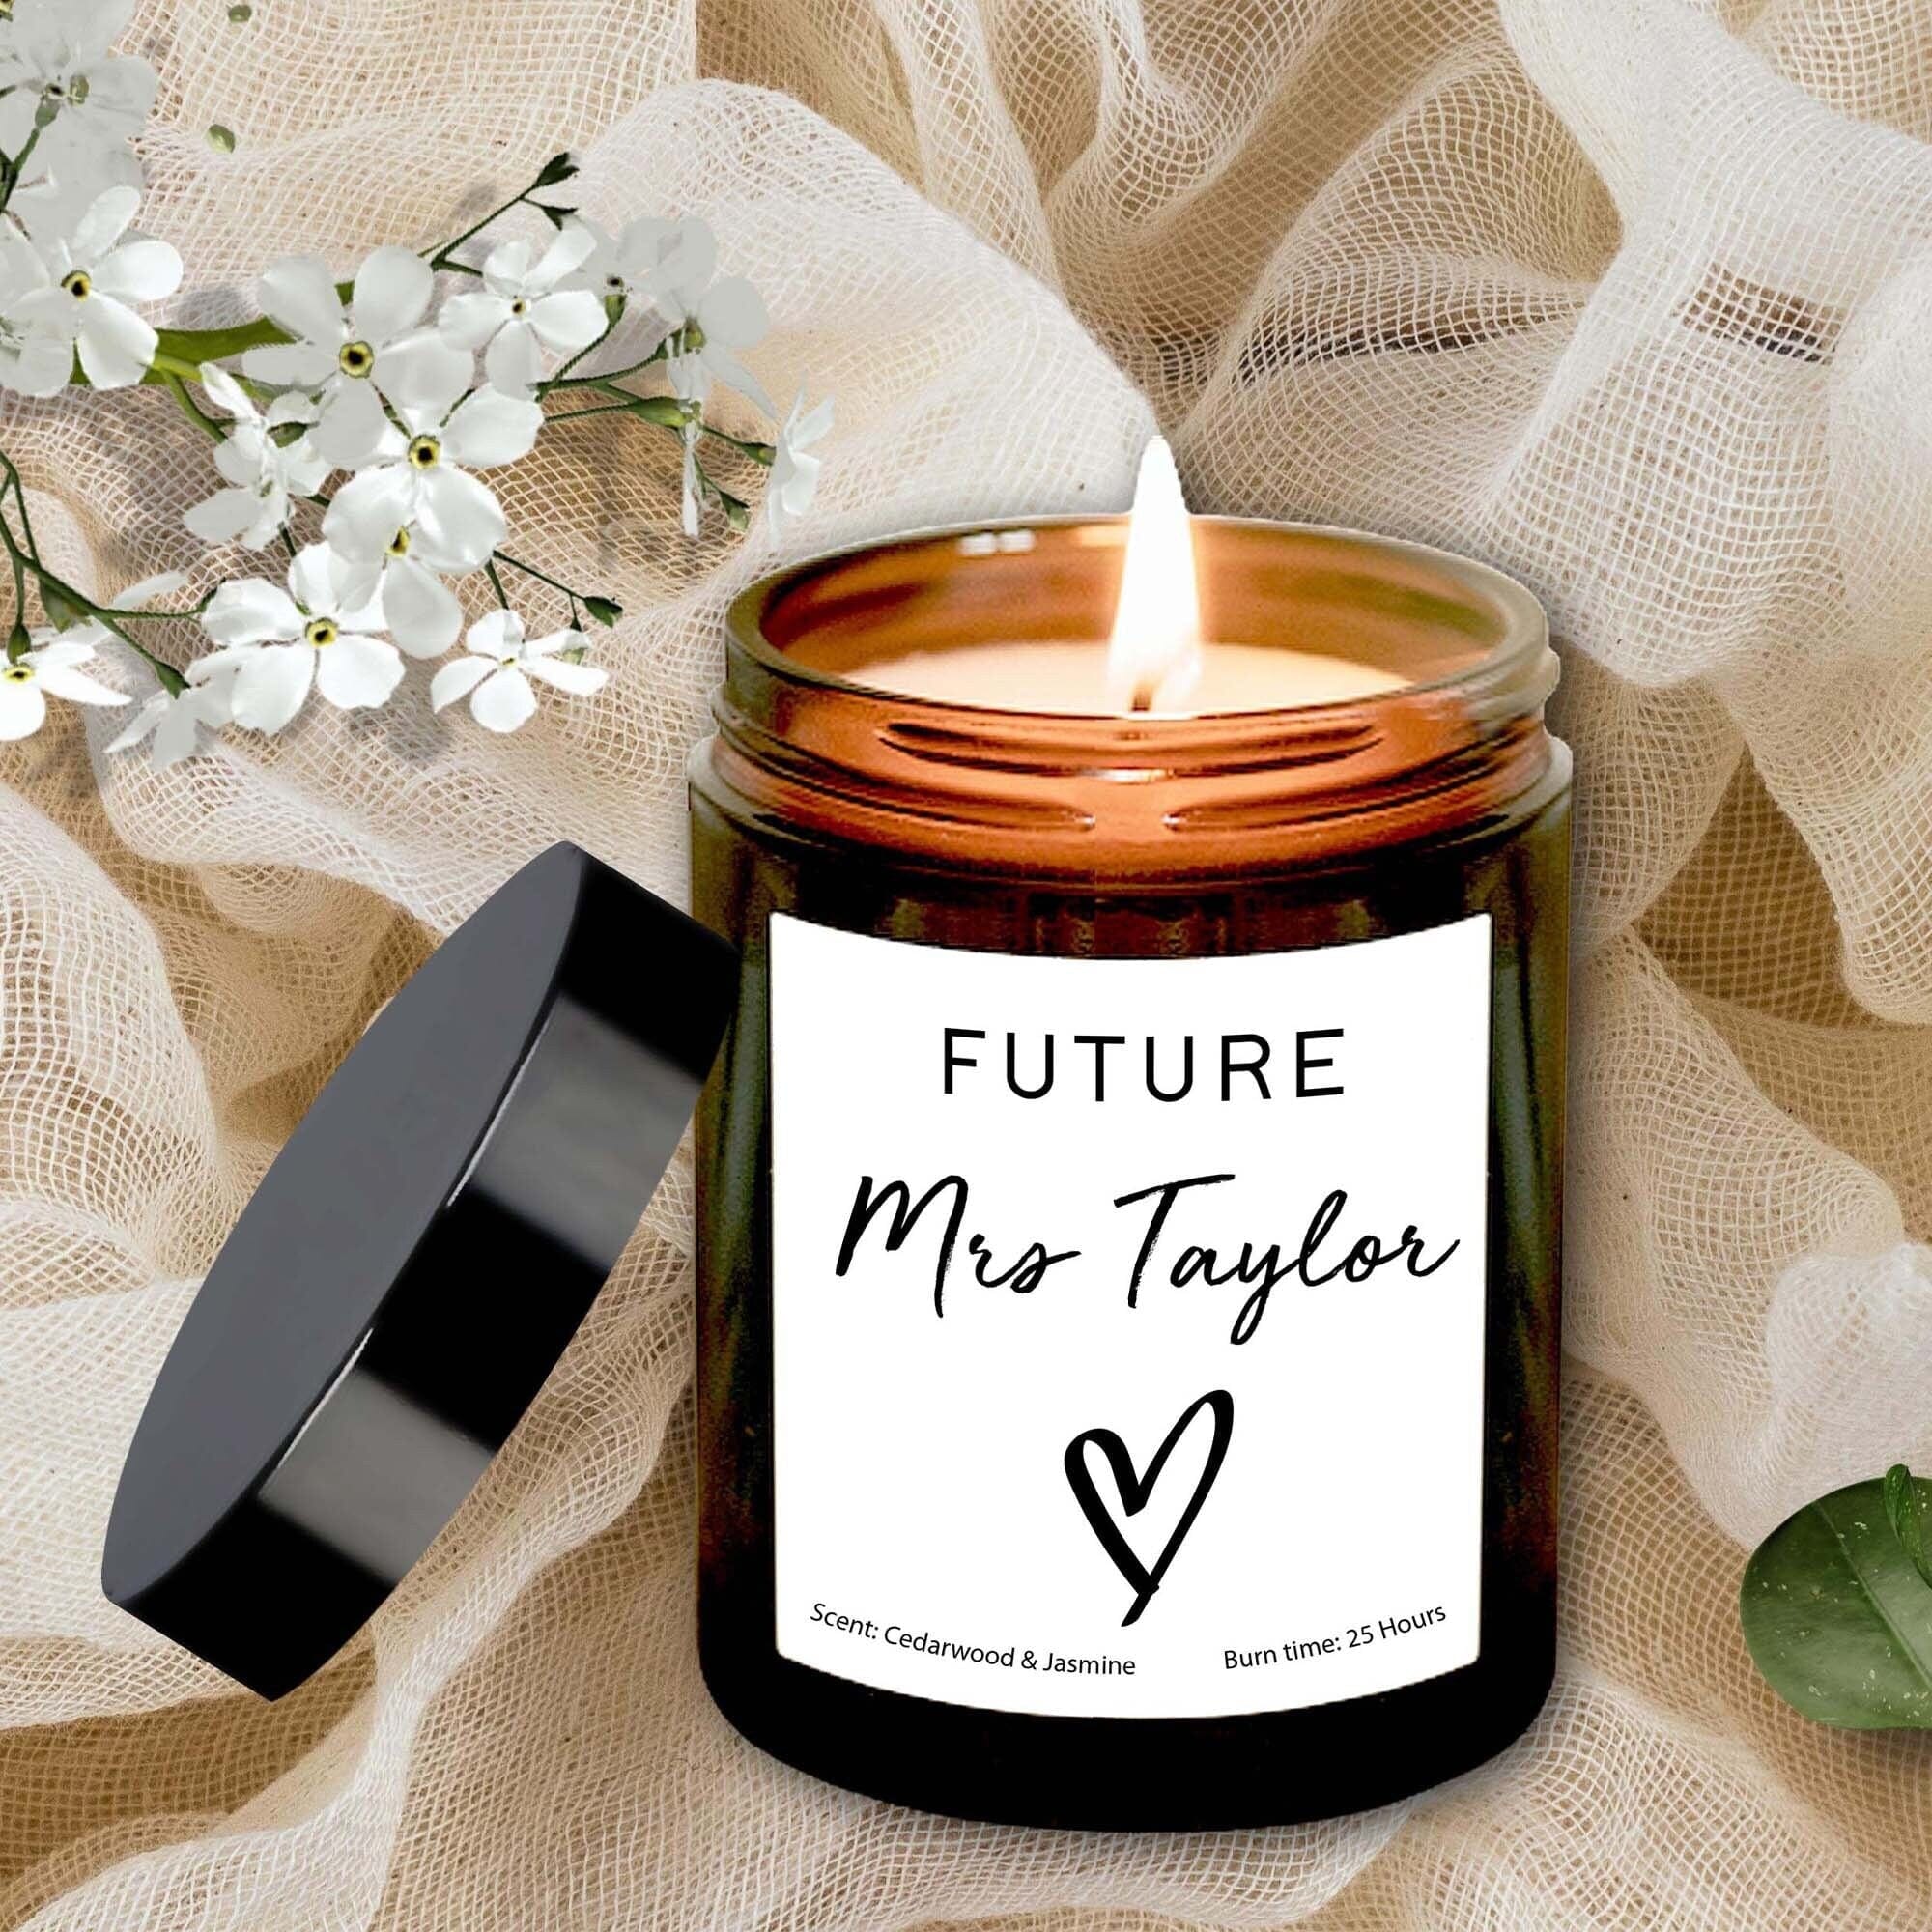 Personalised Candle for Bride, Hen Party Gift for Future Mrs, Bride's last names